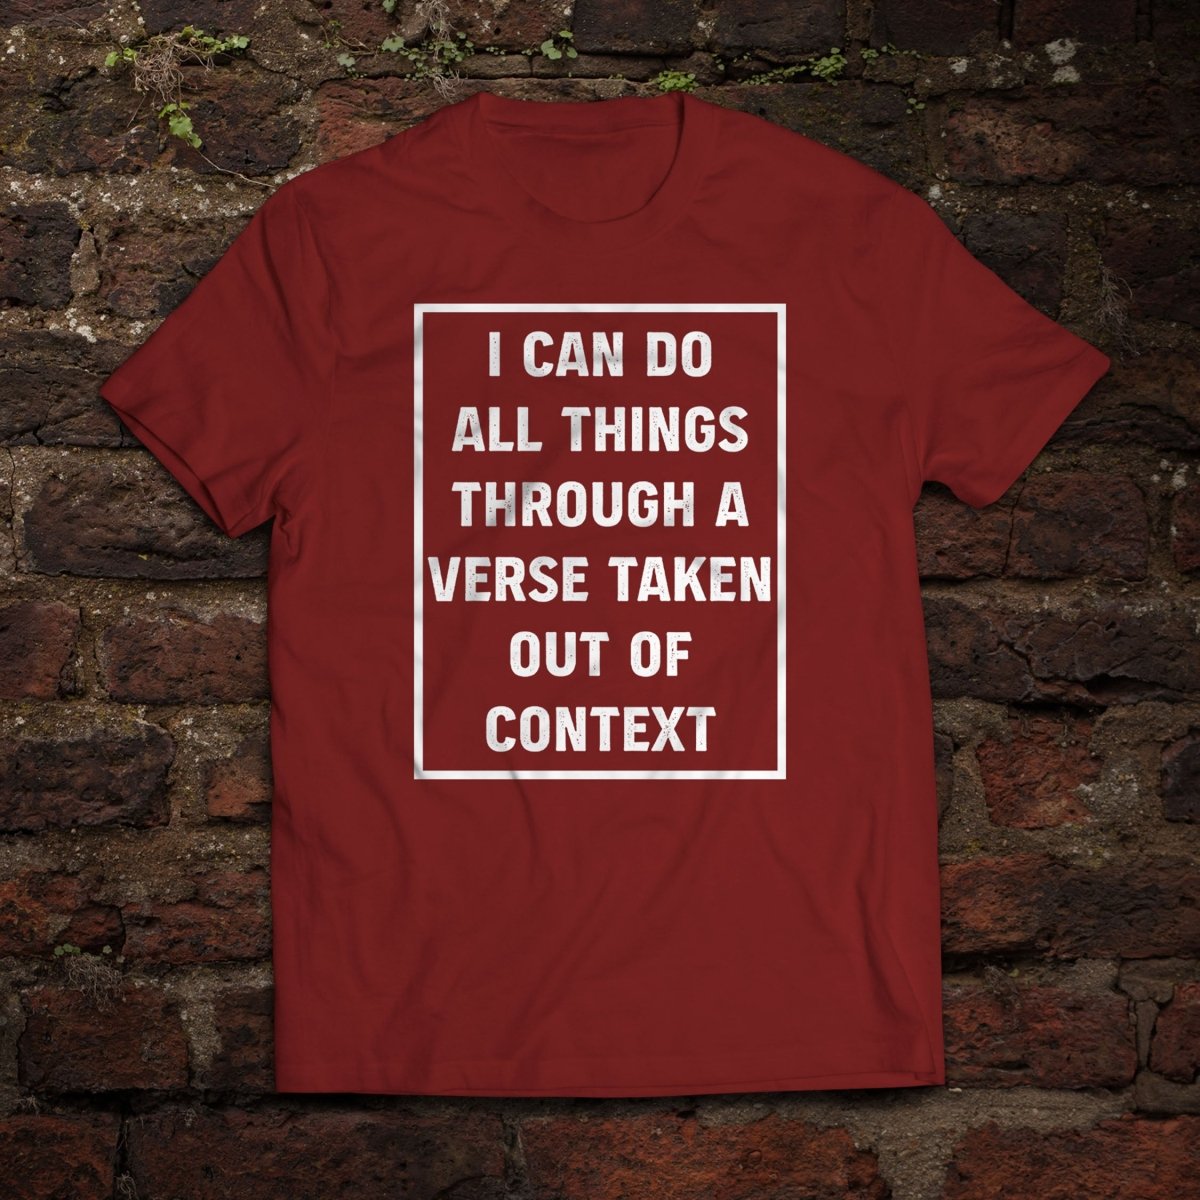 Shirt - All Things - Tee - The Reformed Sage - #reformed# - #reformed_gifts# - #christian_gifts#